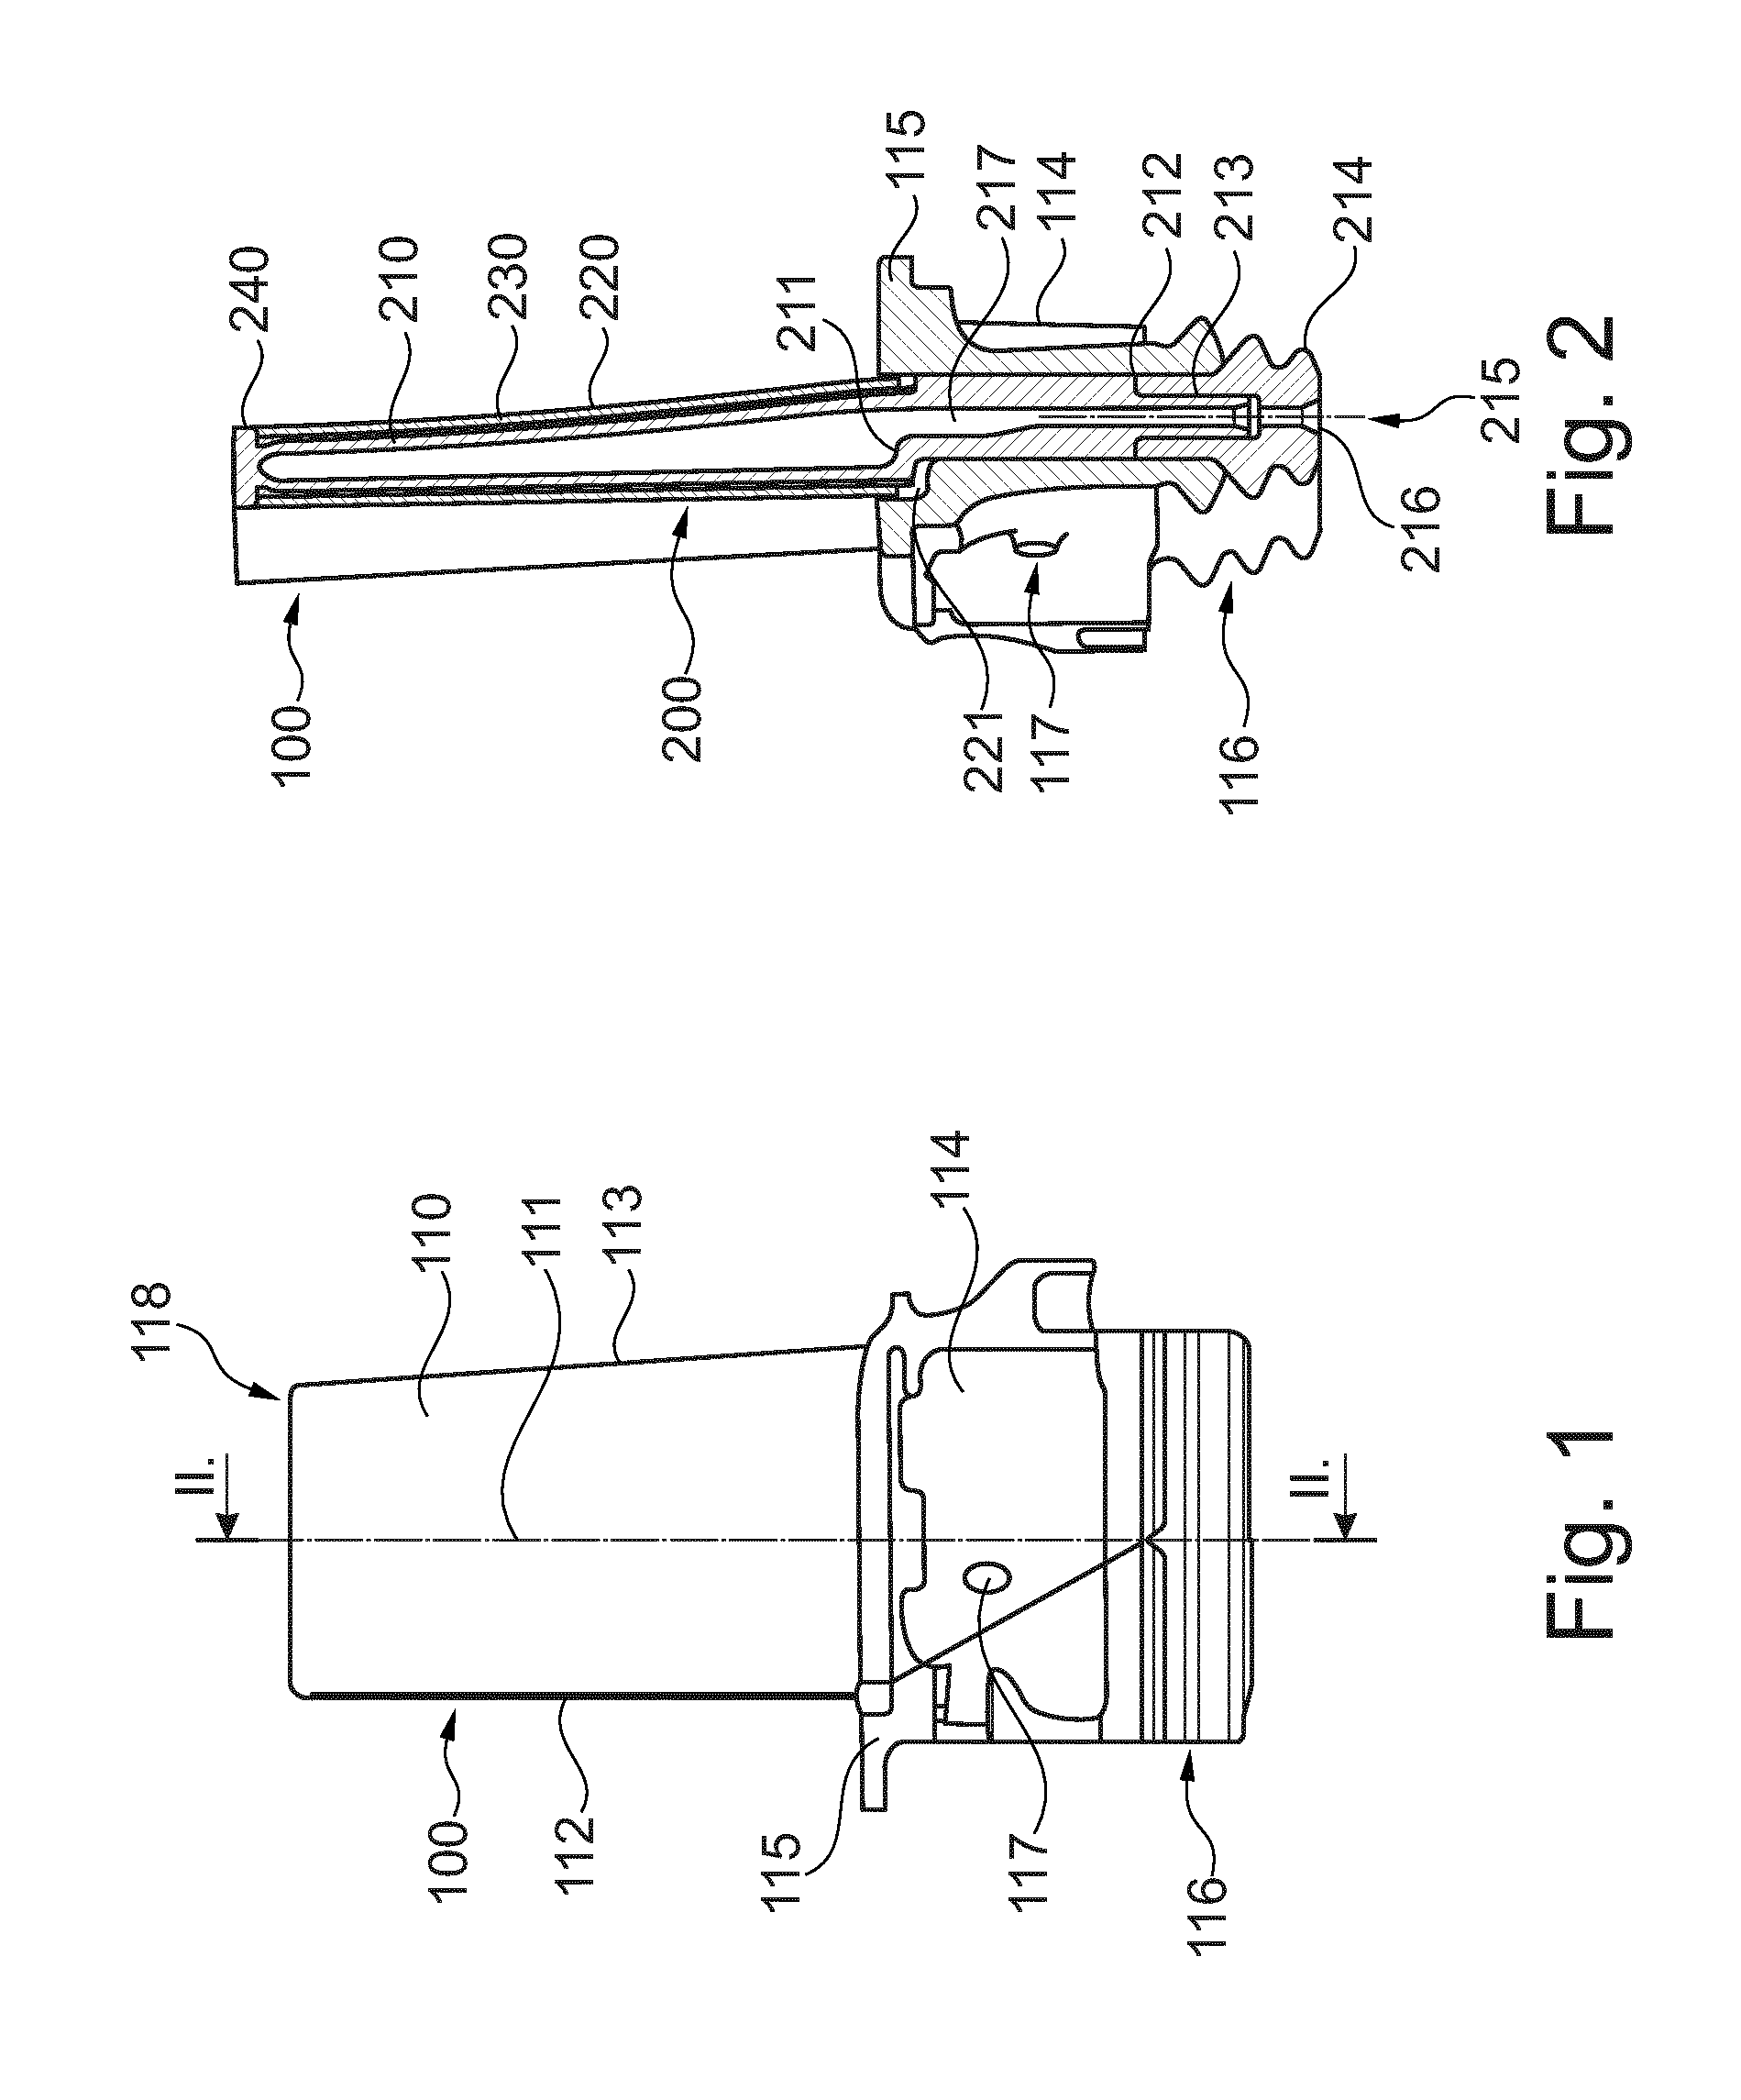 Rotor blade or guide vane assembly